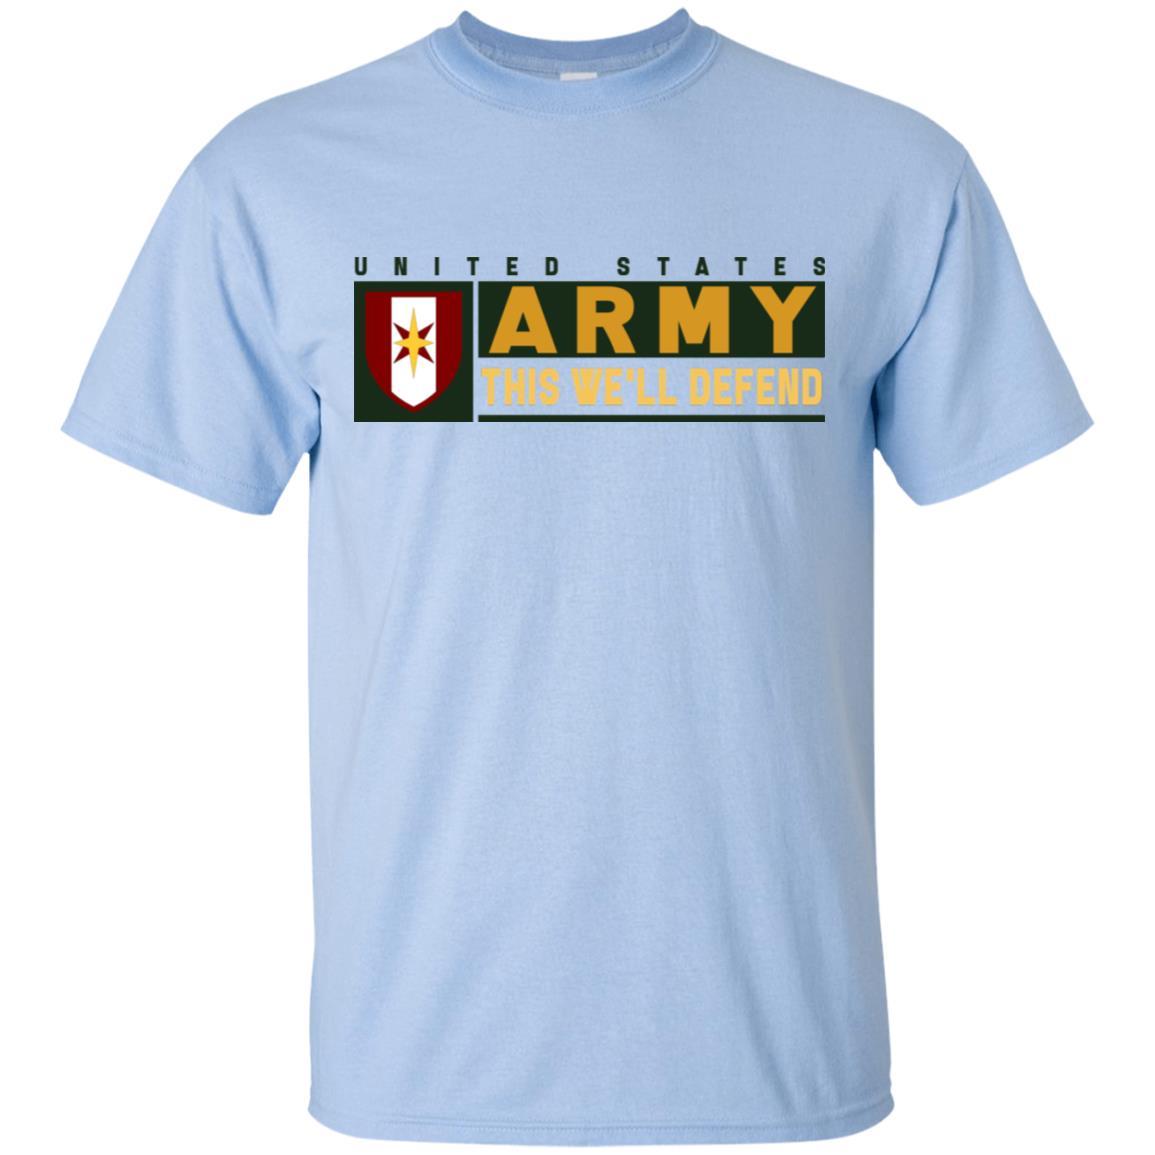 US Army 44 MEDICAL BRIGADE- This We'll Defend T-Shirt On Front For Men-TShirt-Army-Veterans Nation